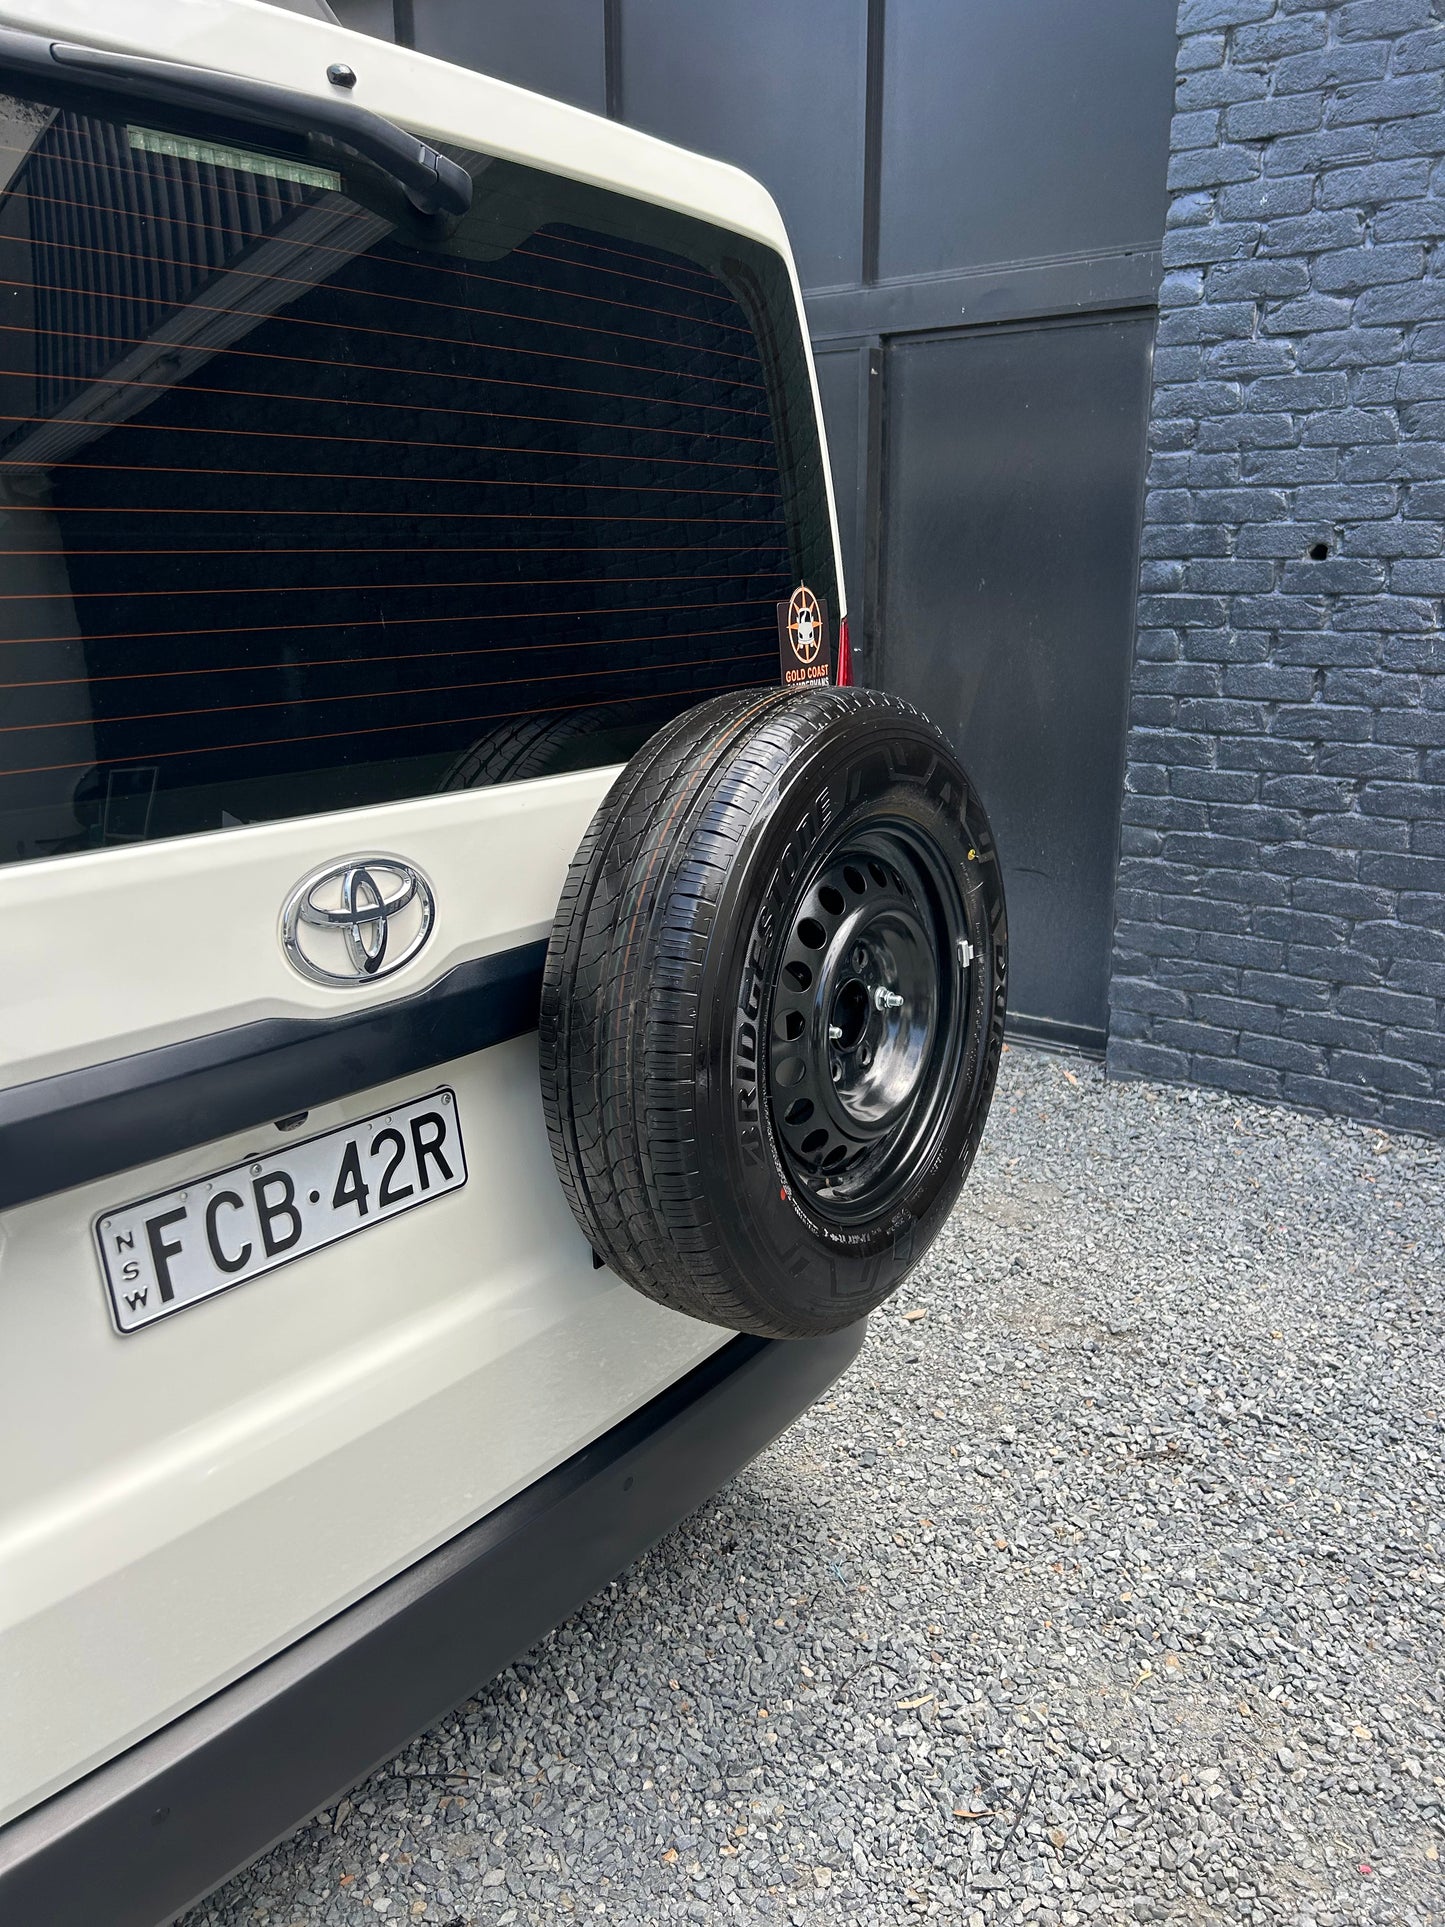 Universal spare wheel carrier